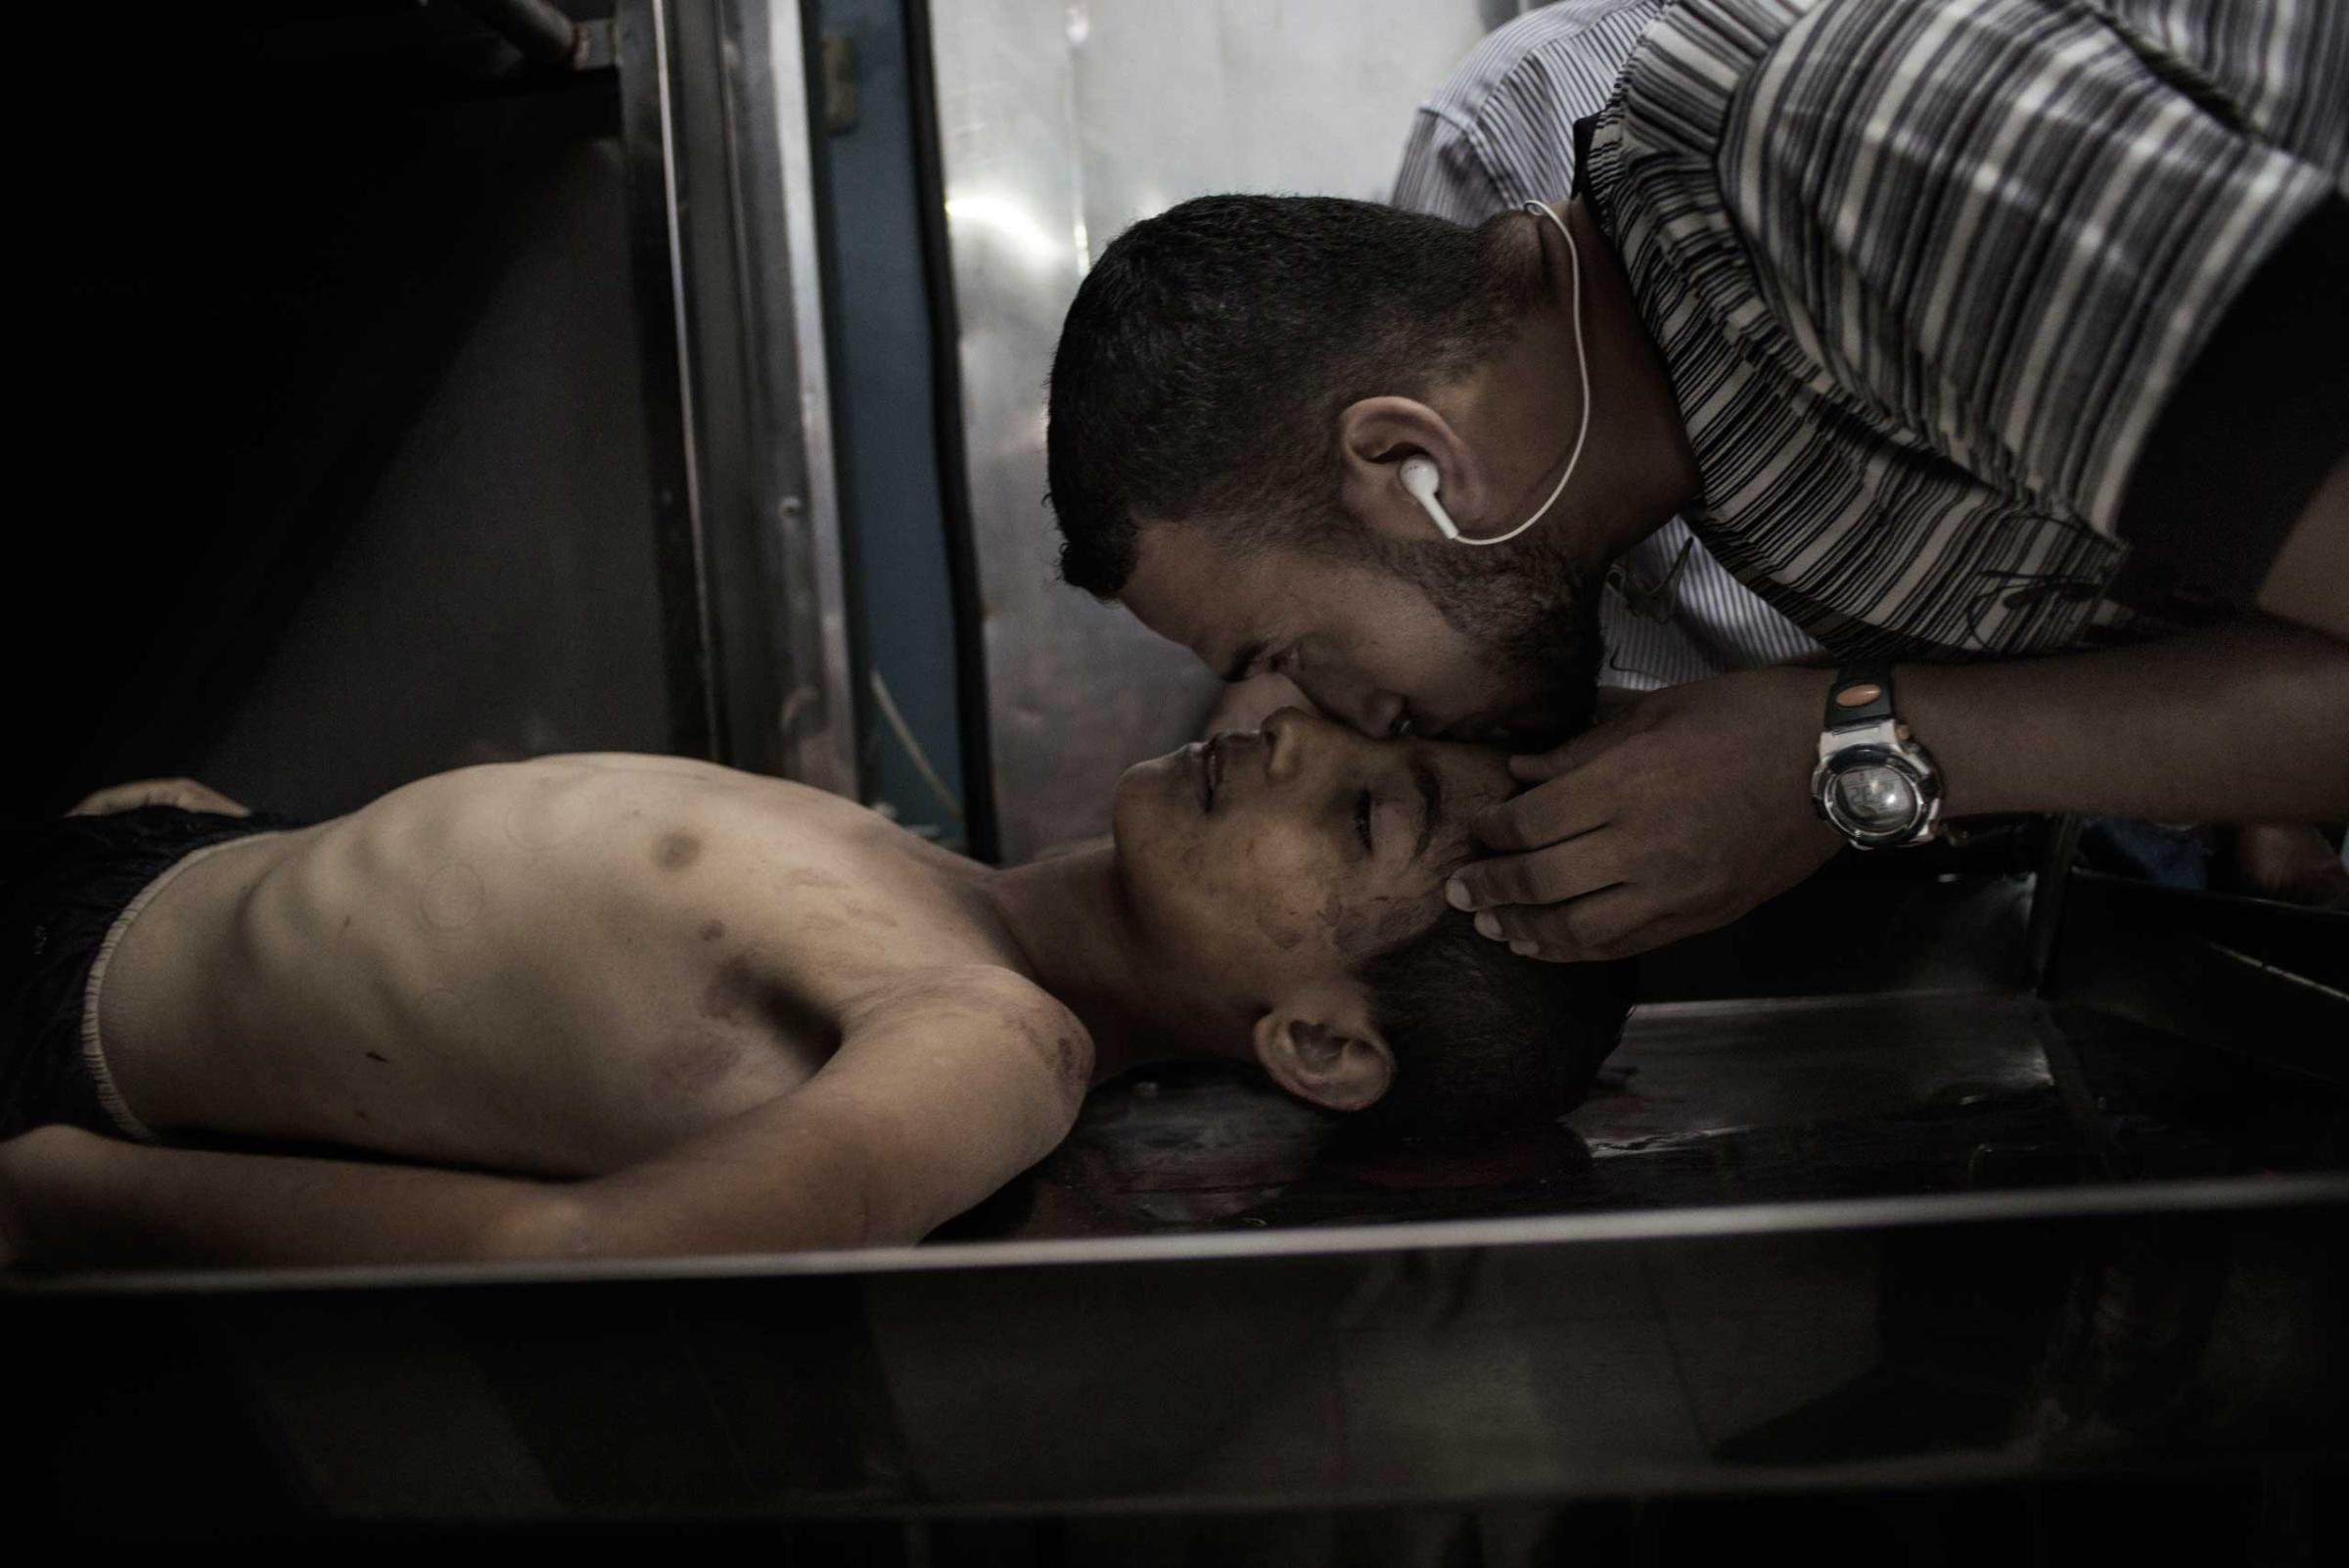 Mohammed Masri, 9, victim of airstrike, is kissed on the forehead by a relative at the morgue of the Beit Hanoun hospital in the Gaza Strip, July 9, 2014.